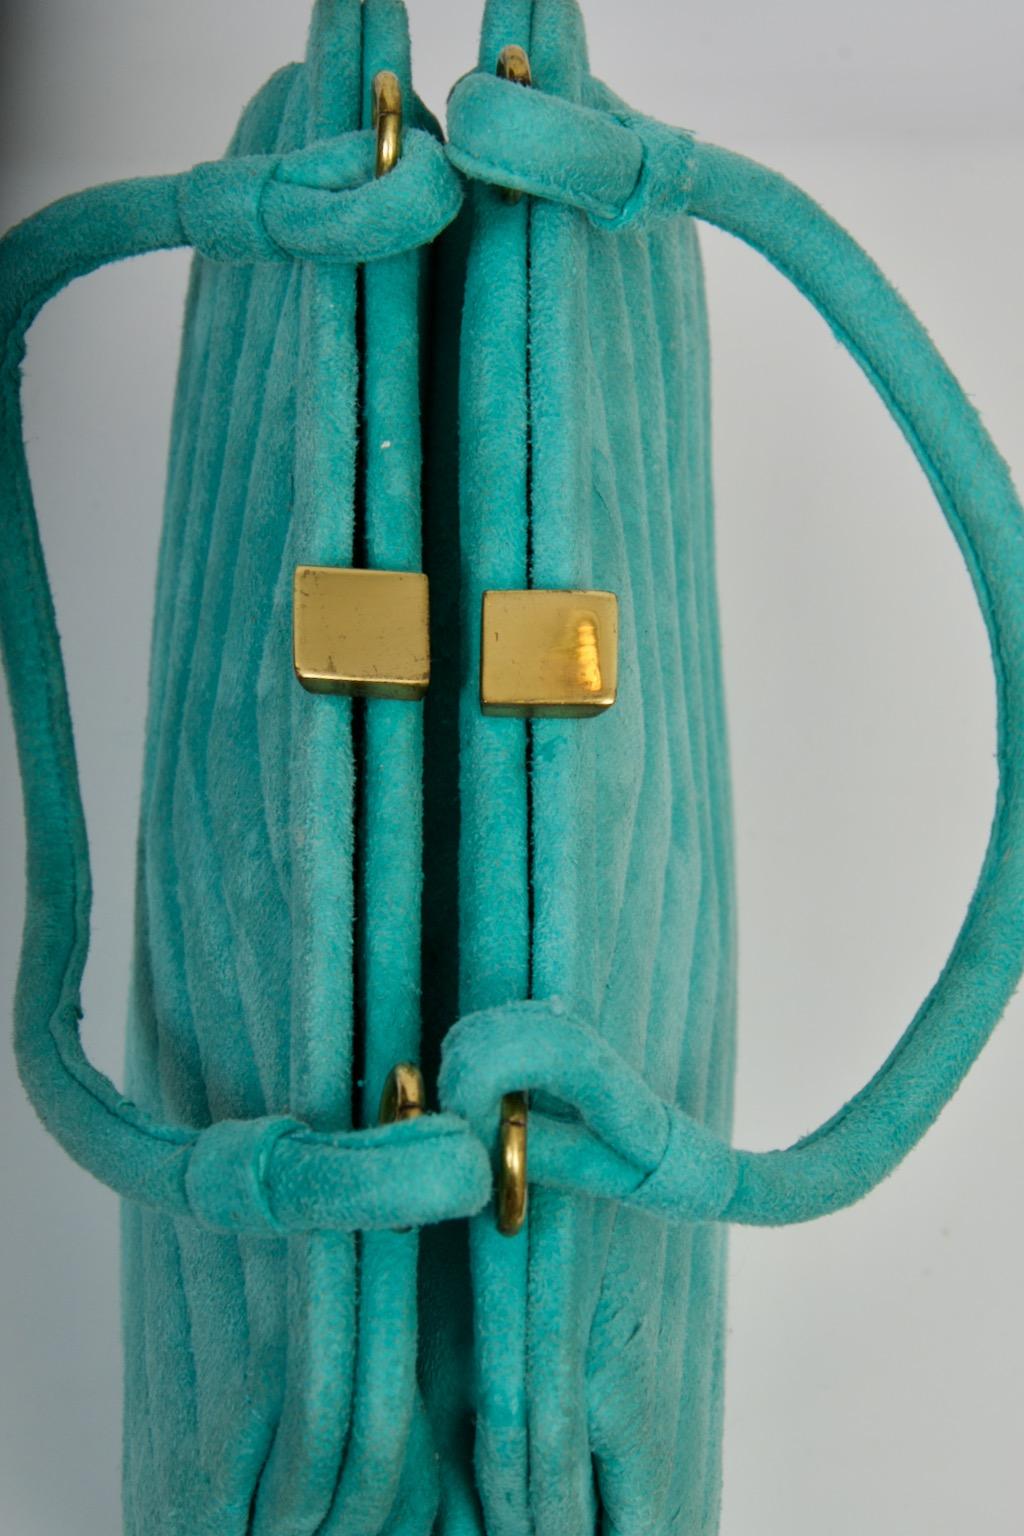 Aqua Suede 1960s Double Pouch Handbag In Good Condition For Sale In Alford, MA